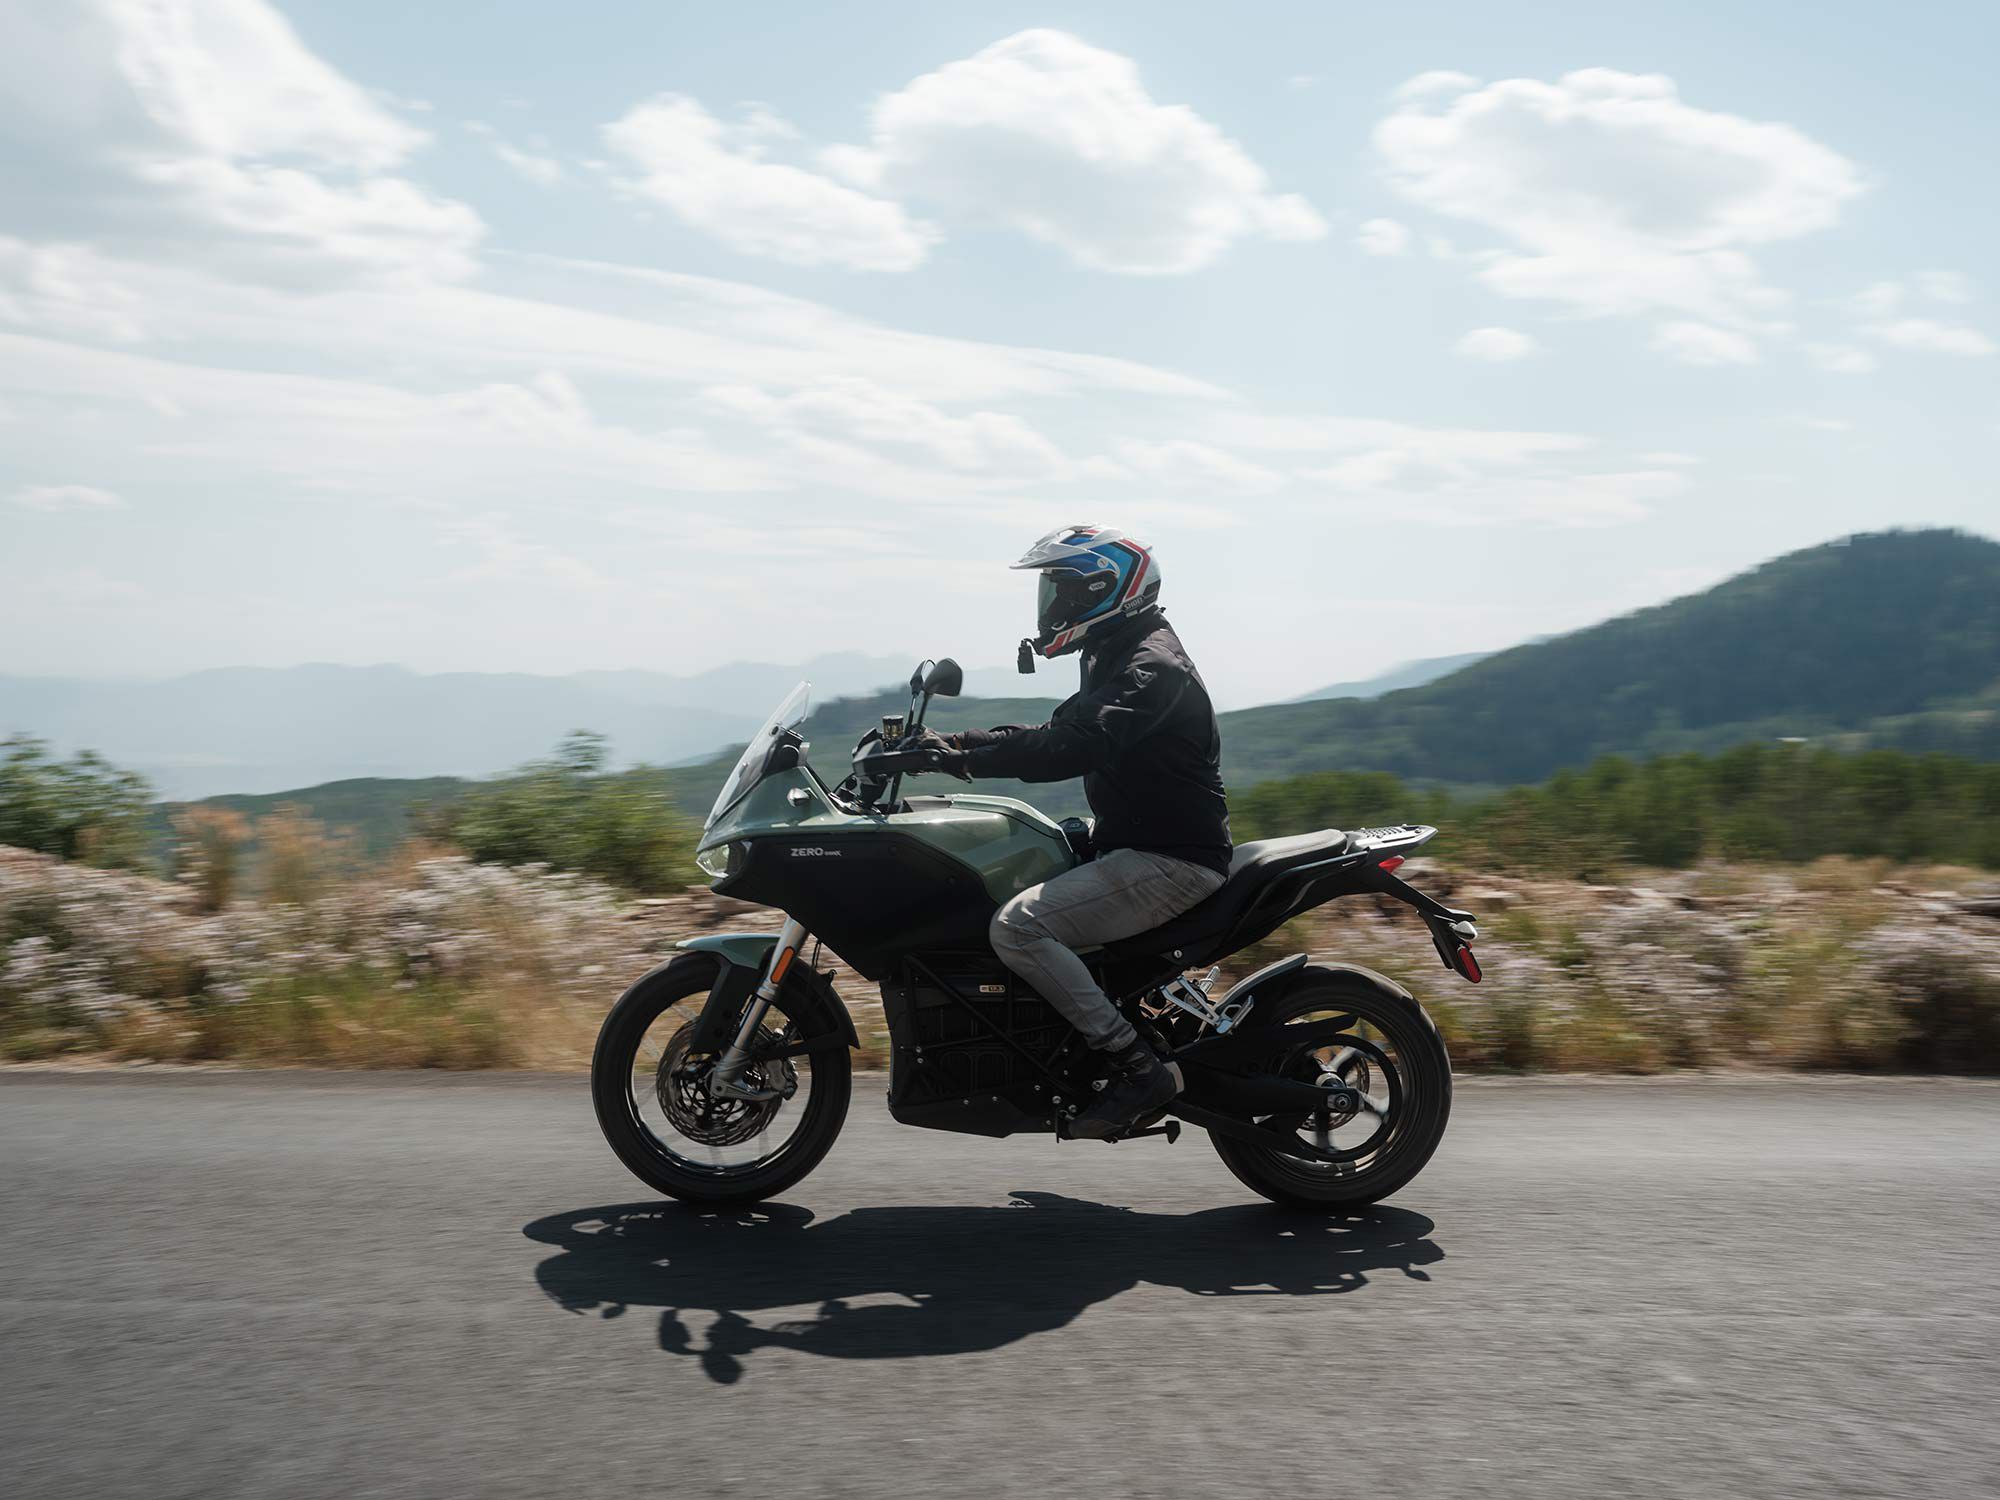 Ride with us at the controls of Zero Motorcycles’ DSR/X electric-powered ADV bike.